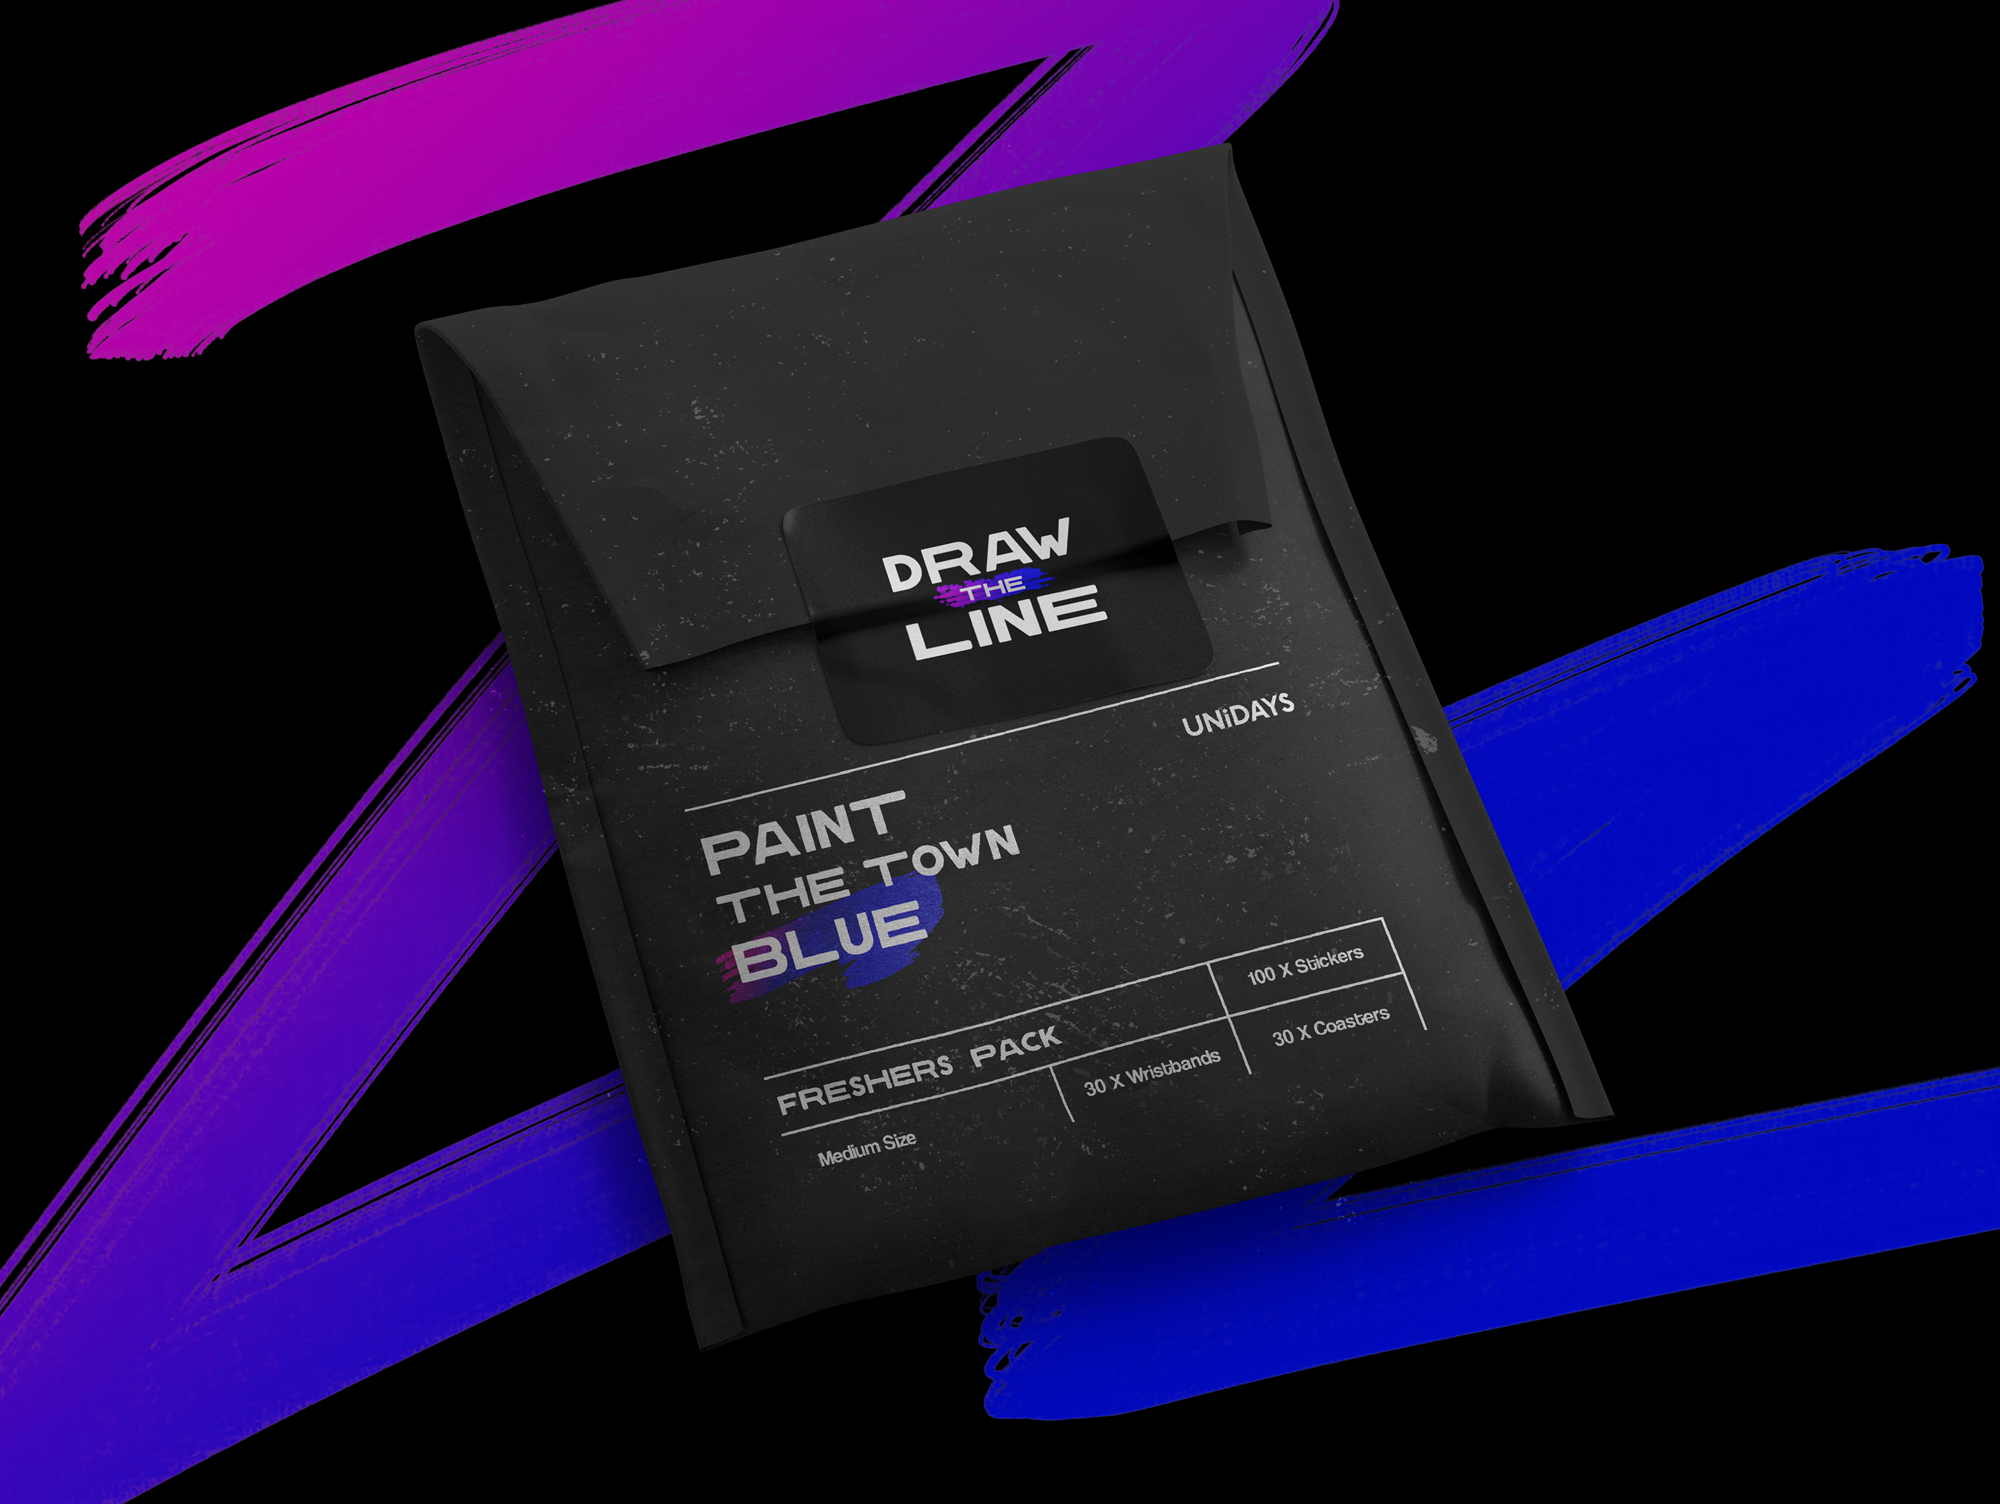 Packaging design by Reiss Tozer, containing UniDays anti spiking drinks coasters and wristbands. A black sealed envelope with 'Draw the Line' campaign branding and the UniDays logo, on a black background with a pink to blue gradient brush stroke.